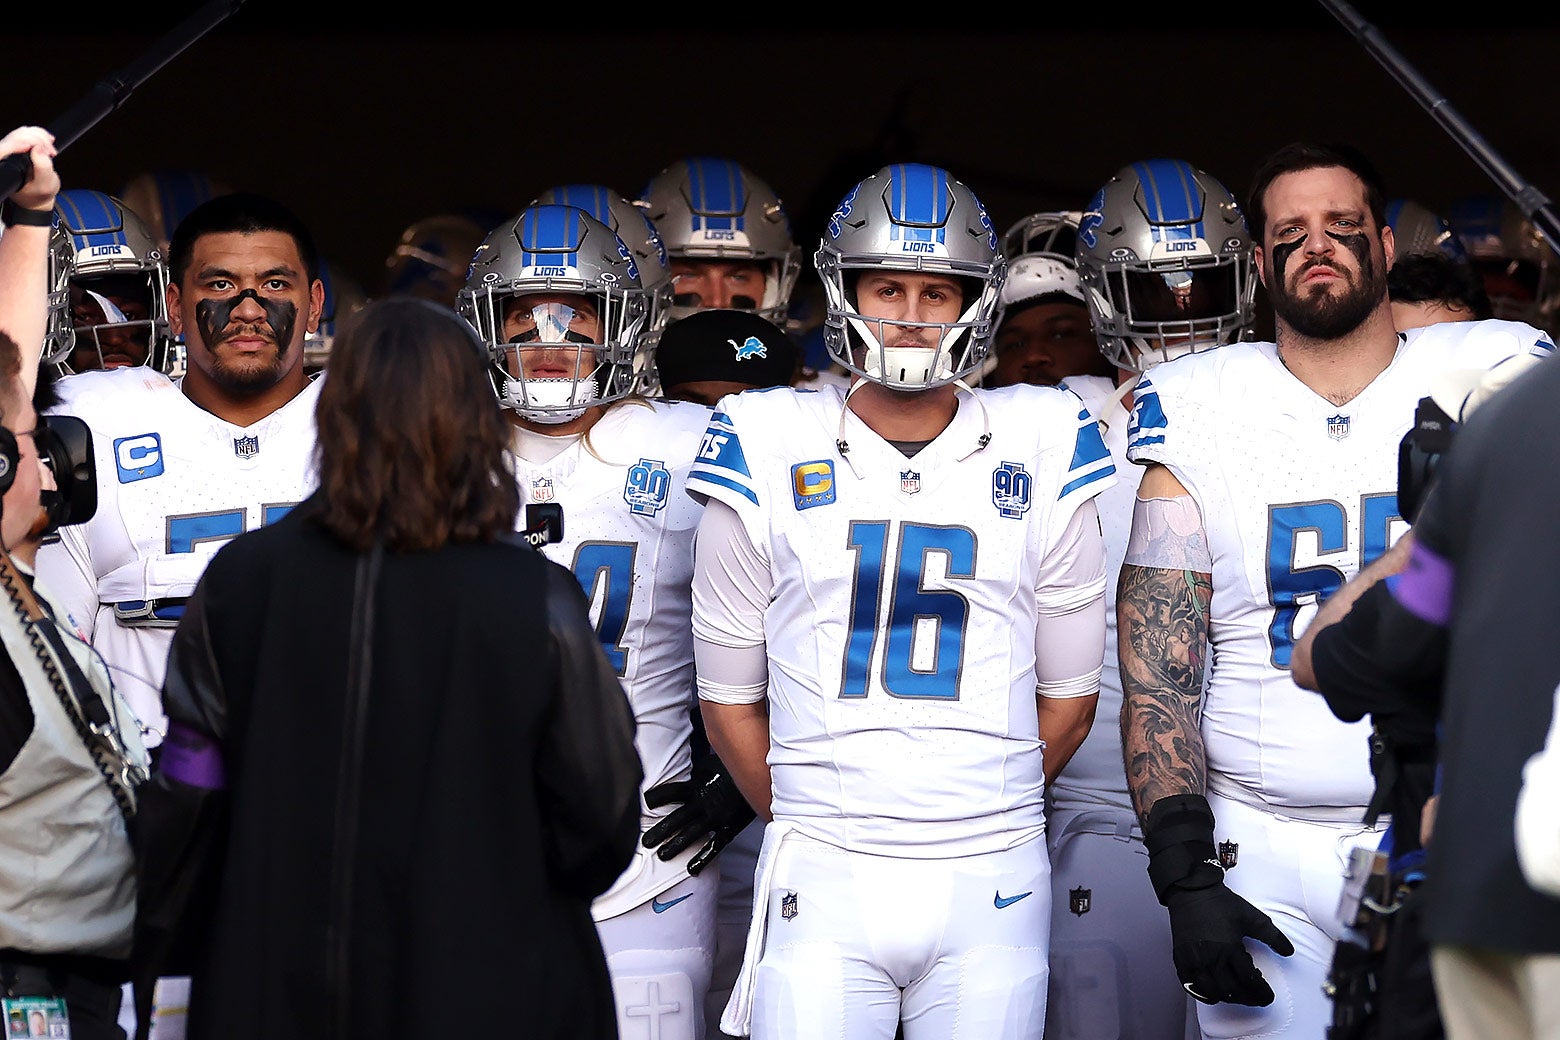 The Lions, with QB Jared Goff centered, stand grim-faced together in the tunnel at the SF stadium on Sunday.